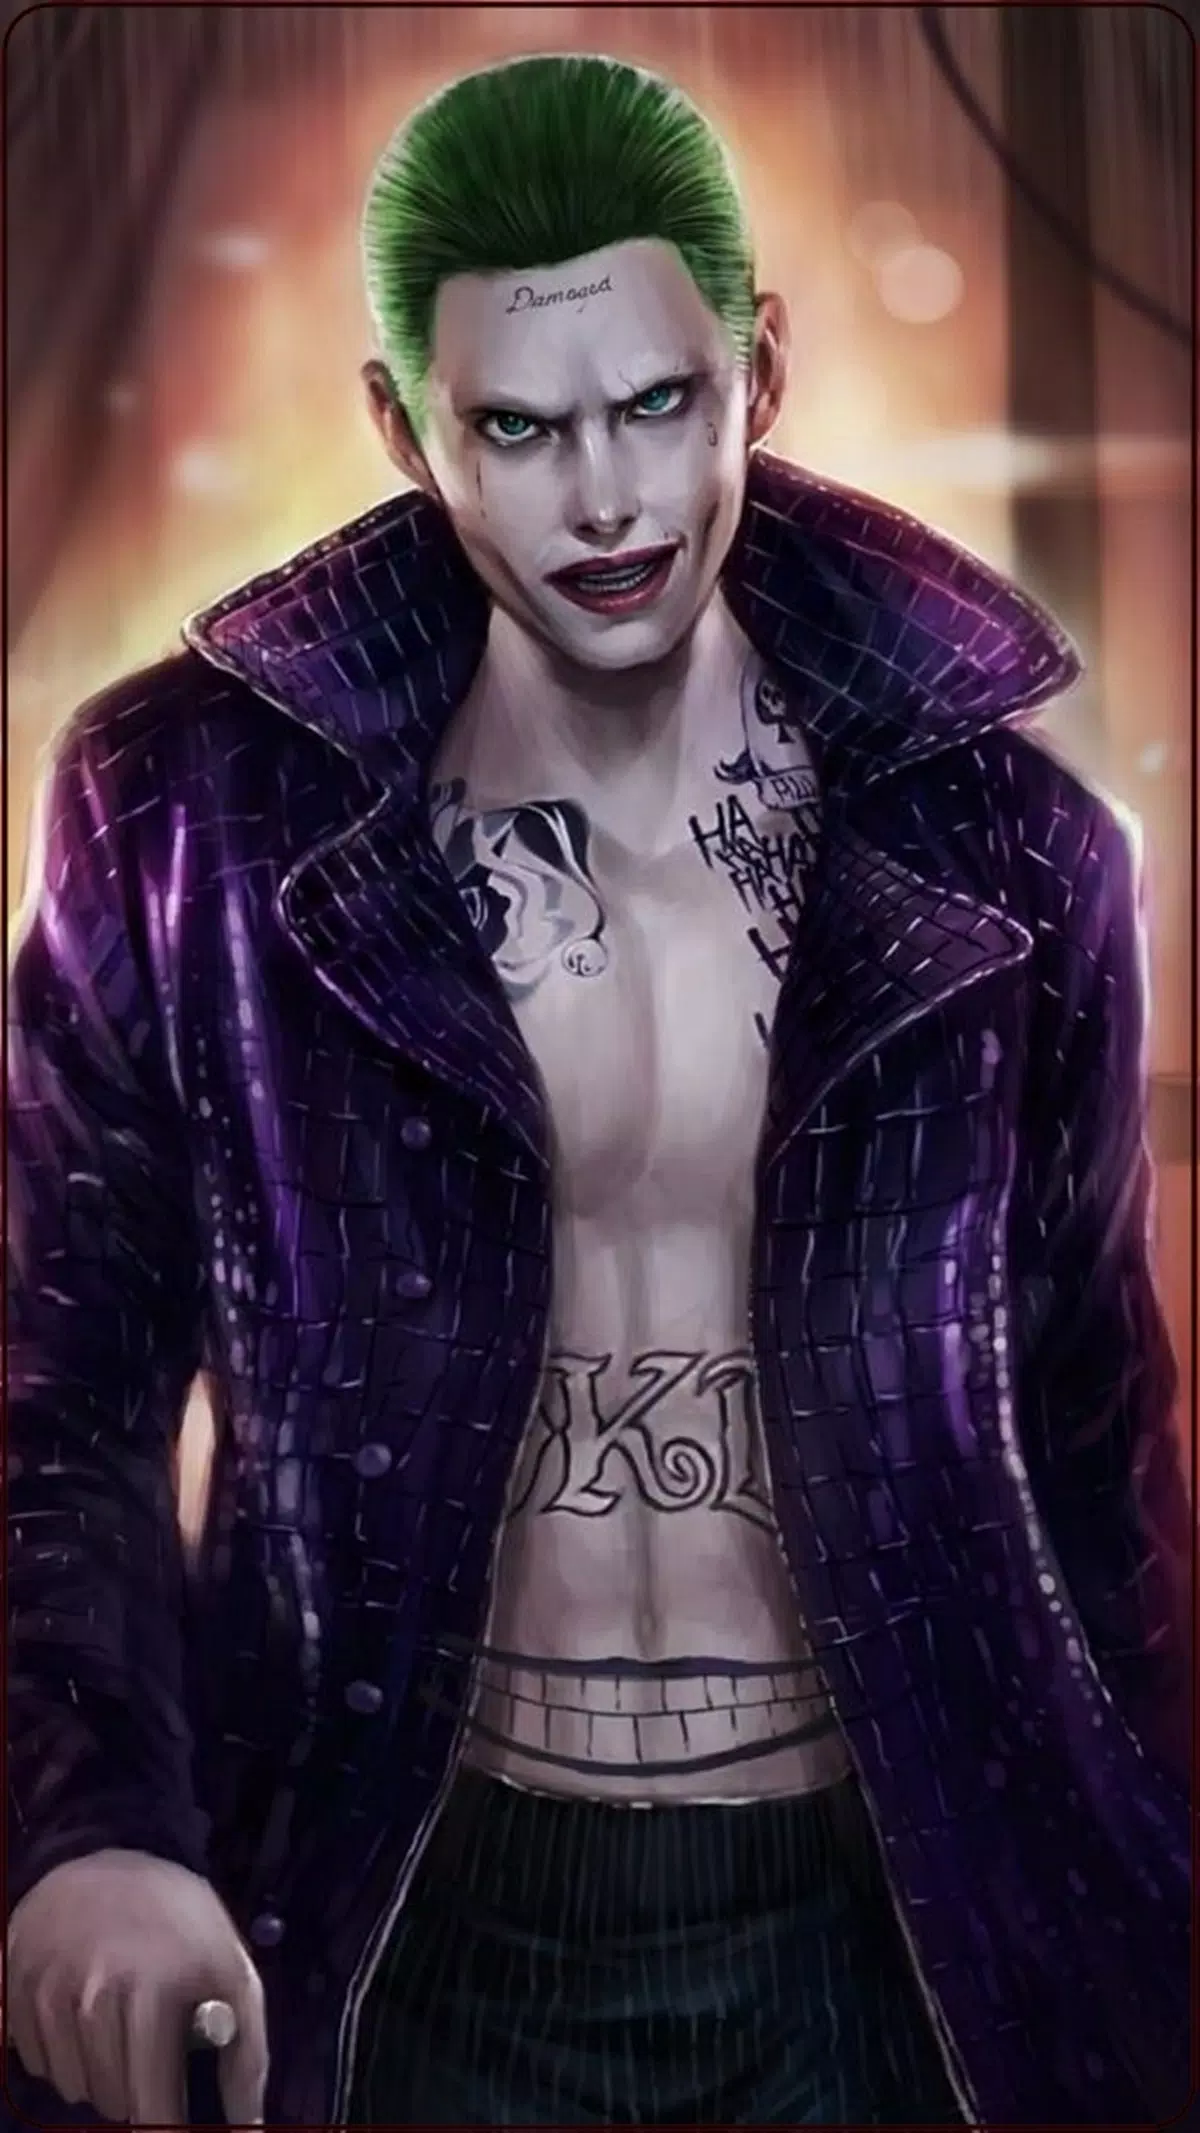 Joker wallpapers hd apk for android download